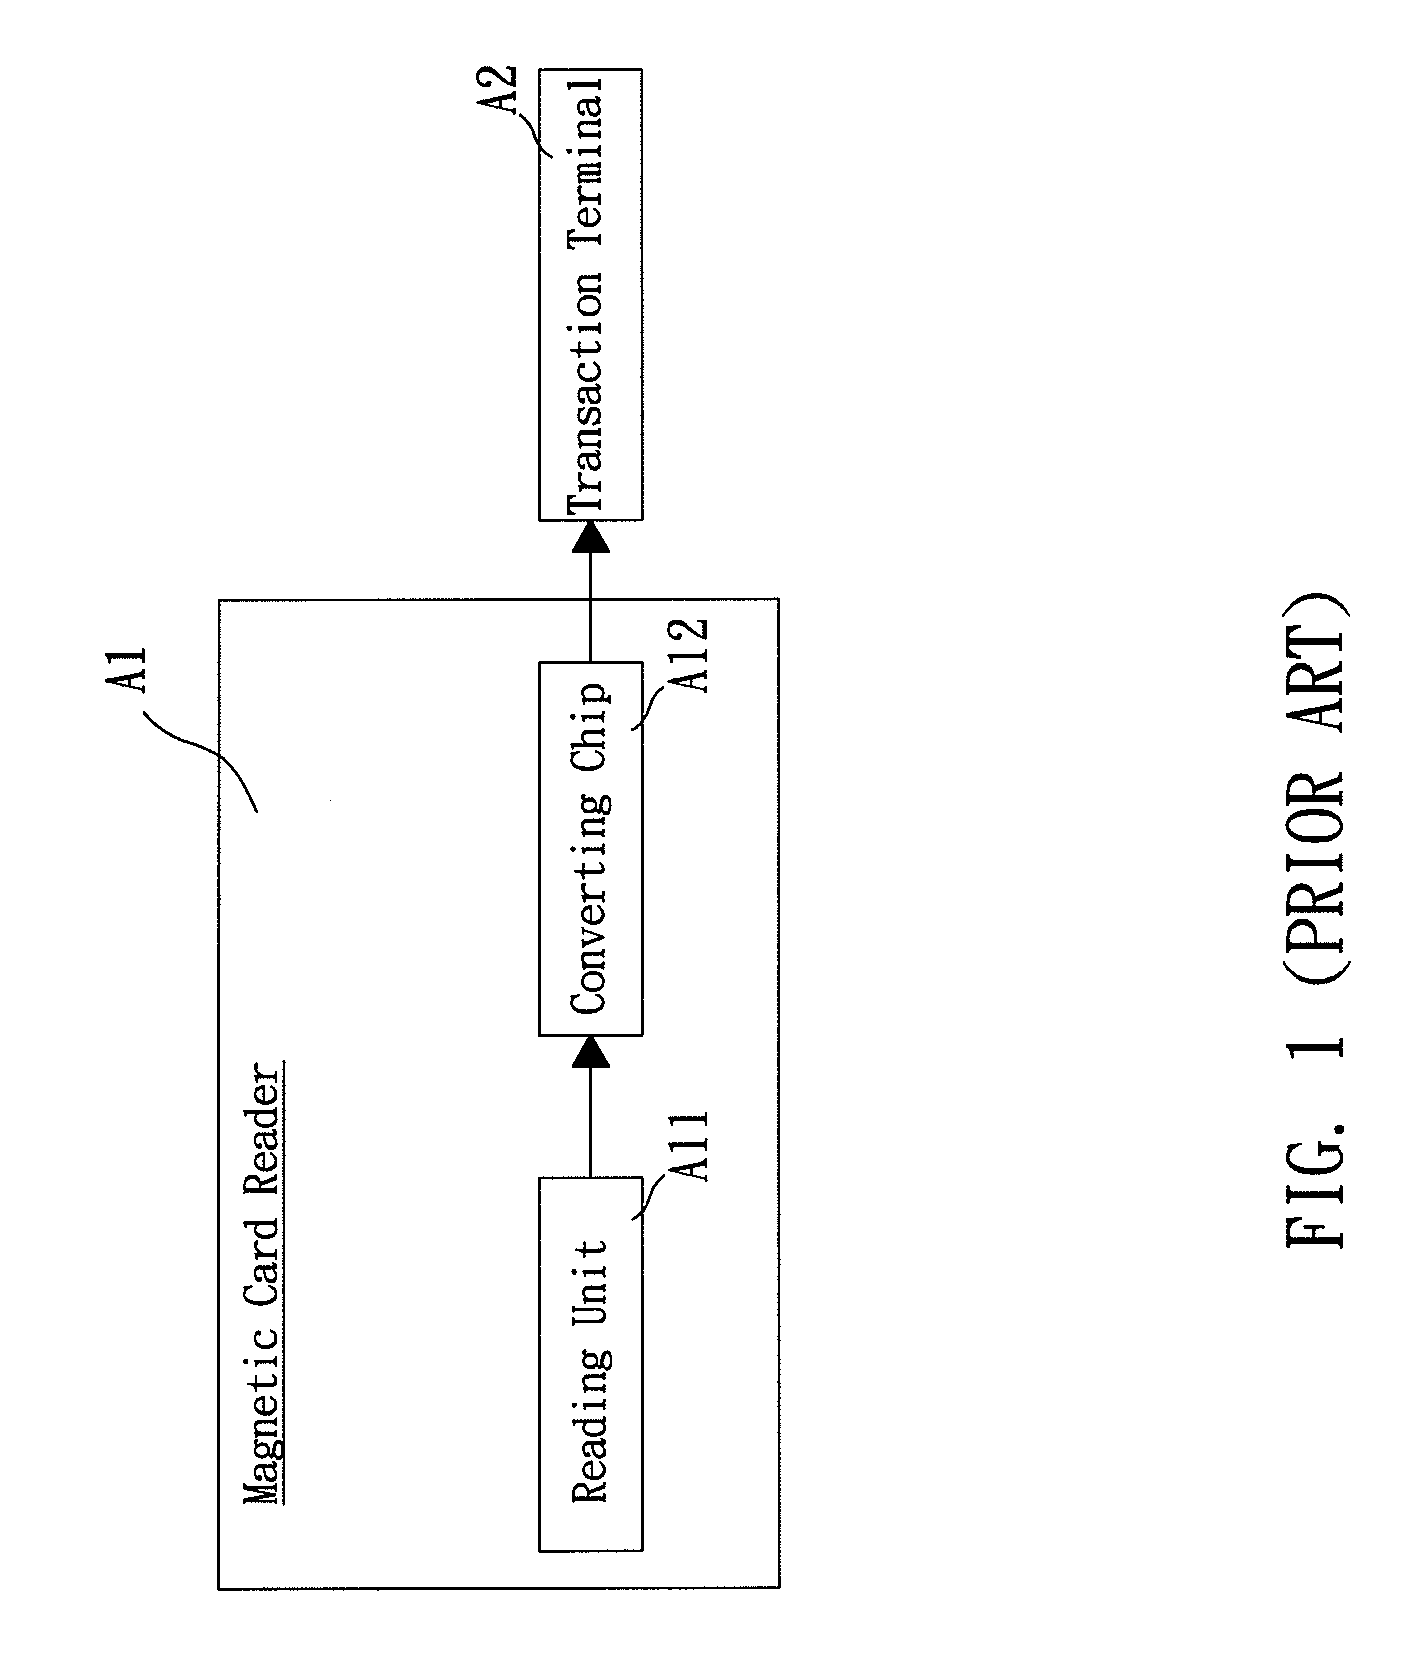 Card reading device for transaction system